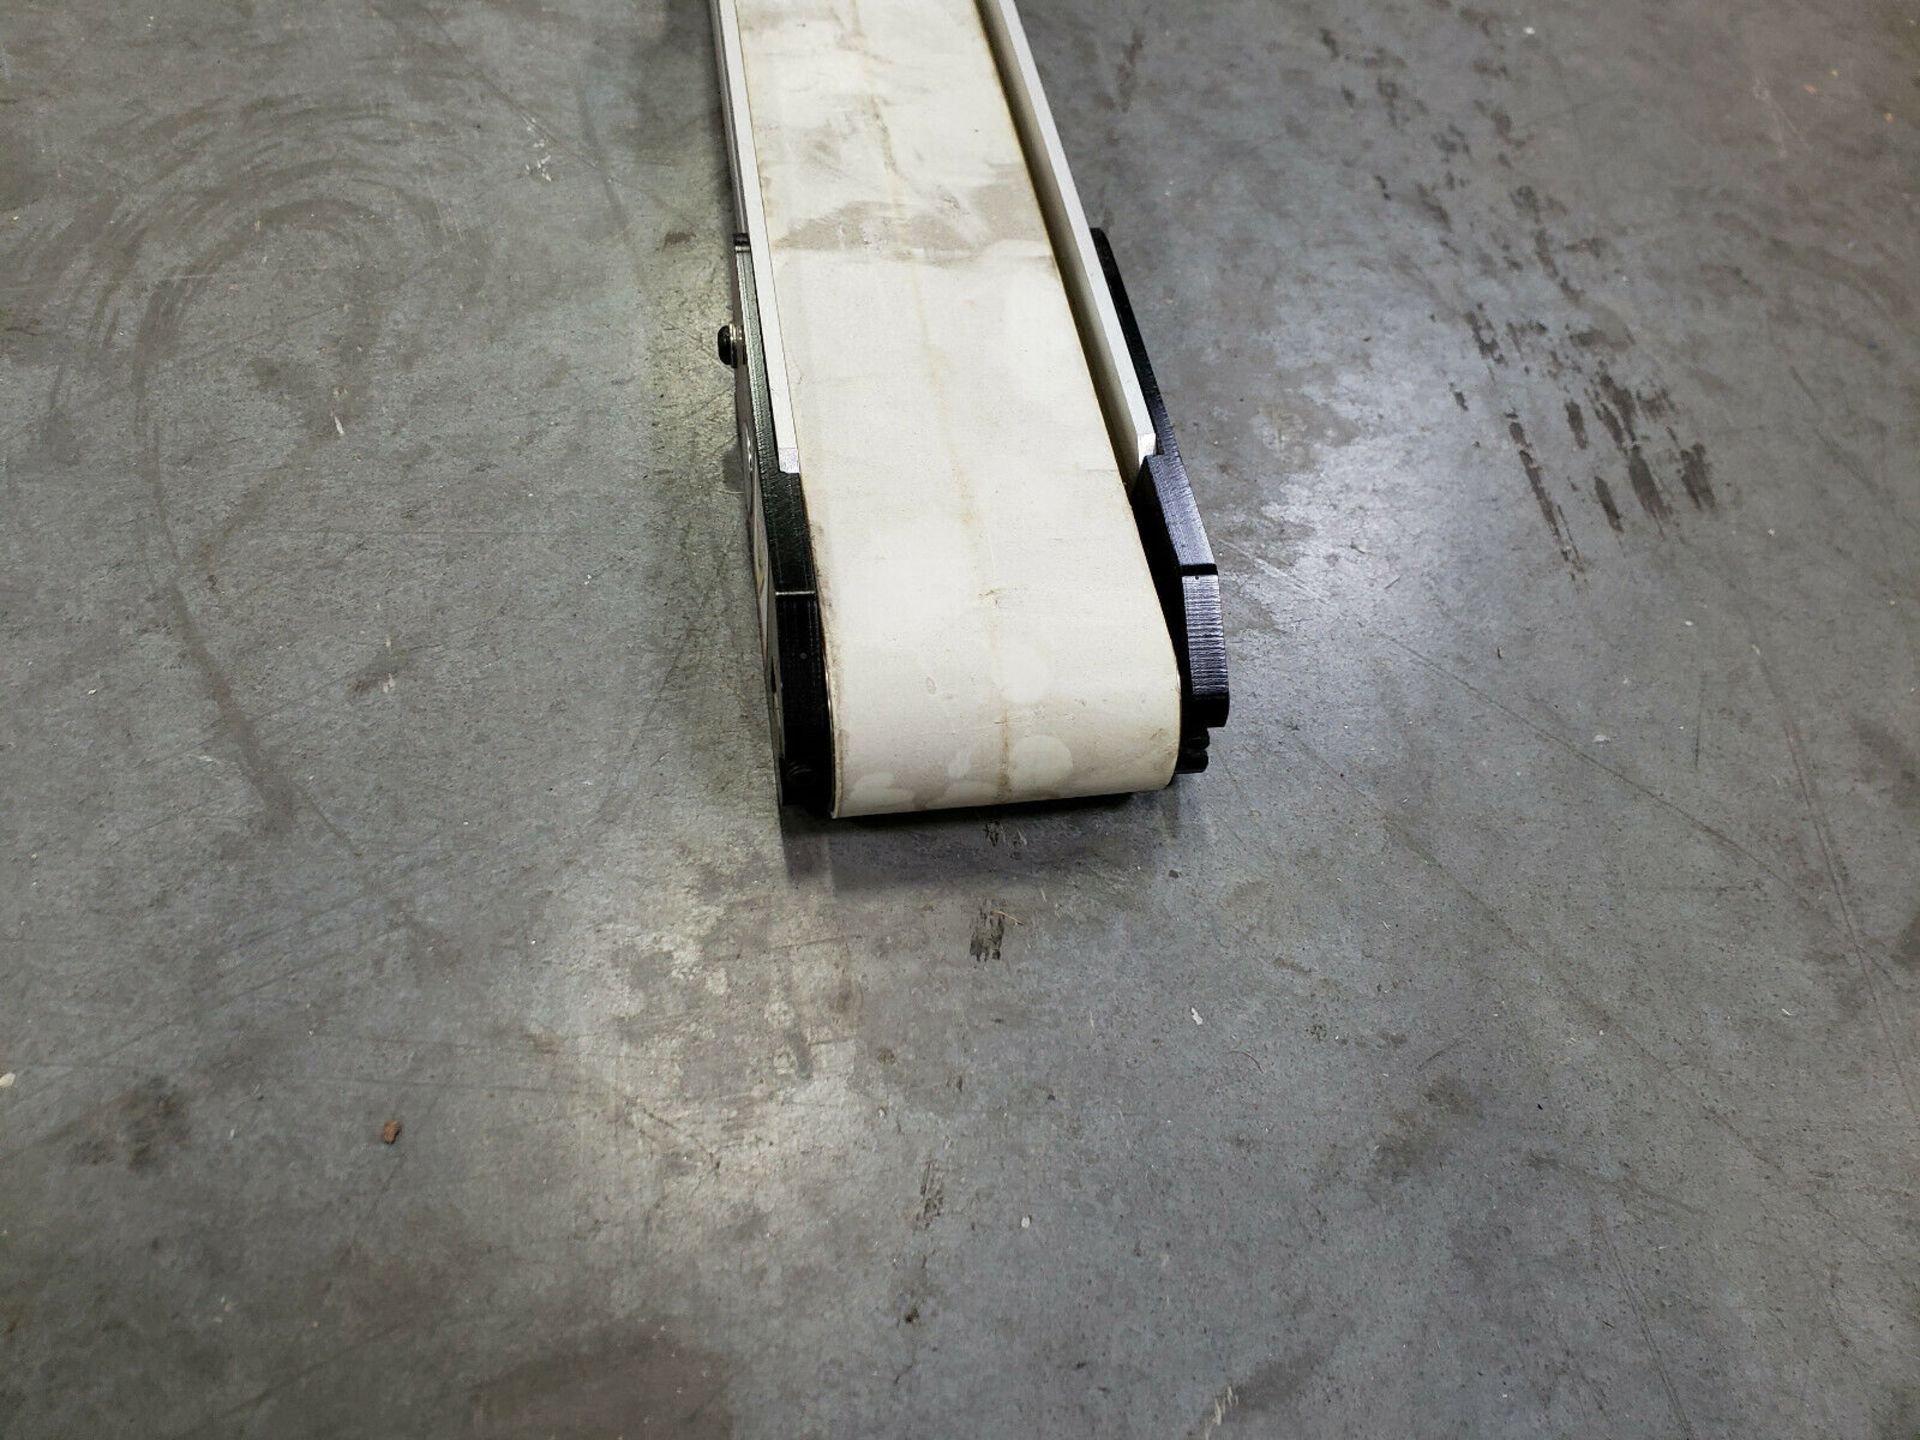 QC INDUSTRIES AUTOMATION BELT CONVEYOR SECTION - Image 3 of 5